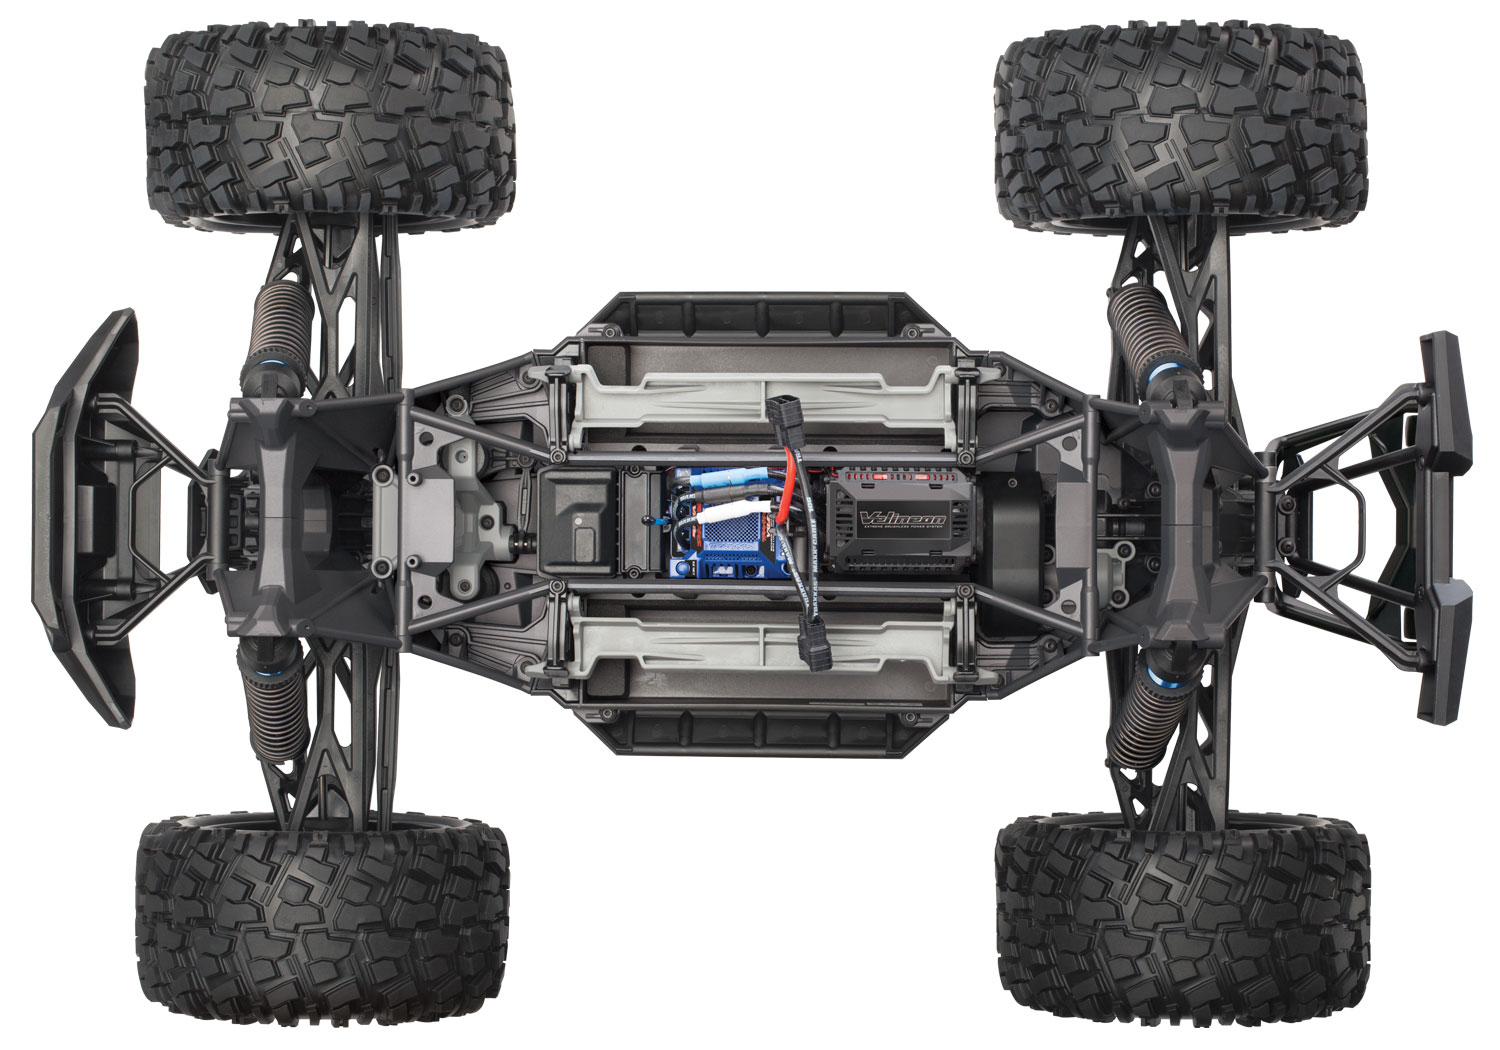 traxxas-77086-4-RnR-4-X-MAXX-4wd-8s-Brushless-Pick-Up-Truck-the-evolution-of-tough-Monstermachine